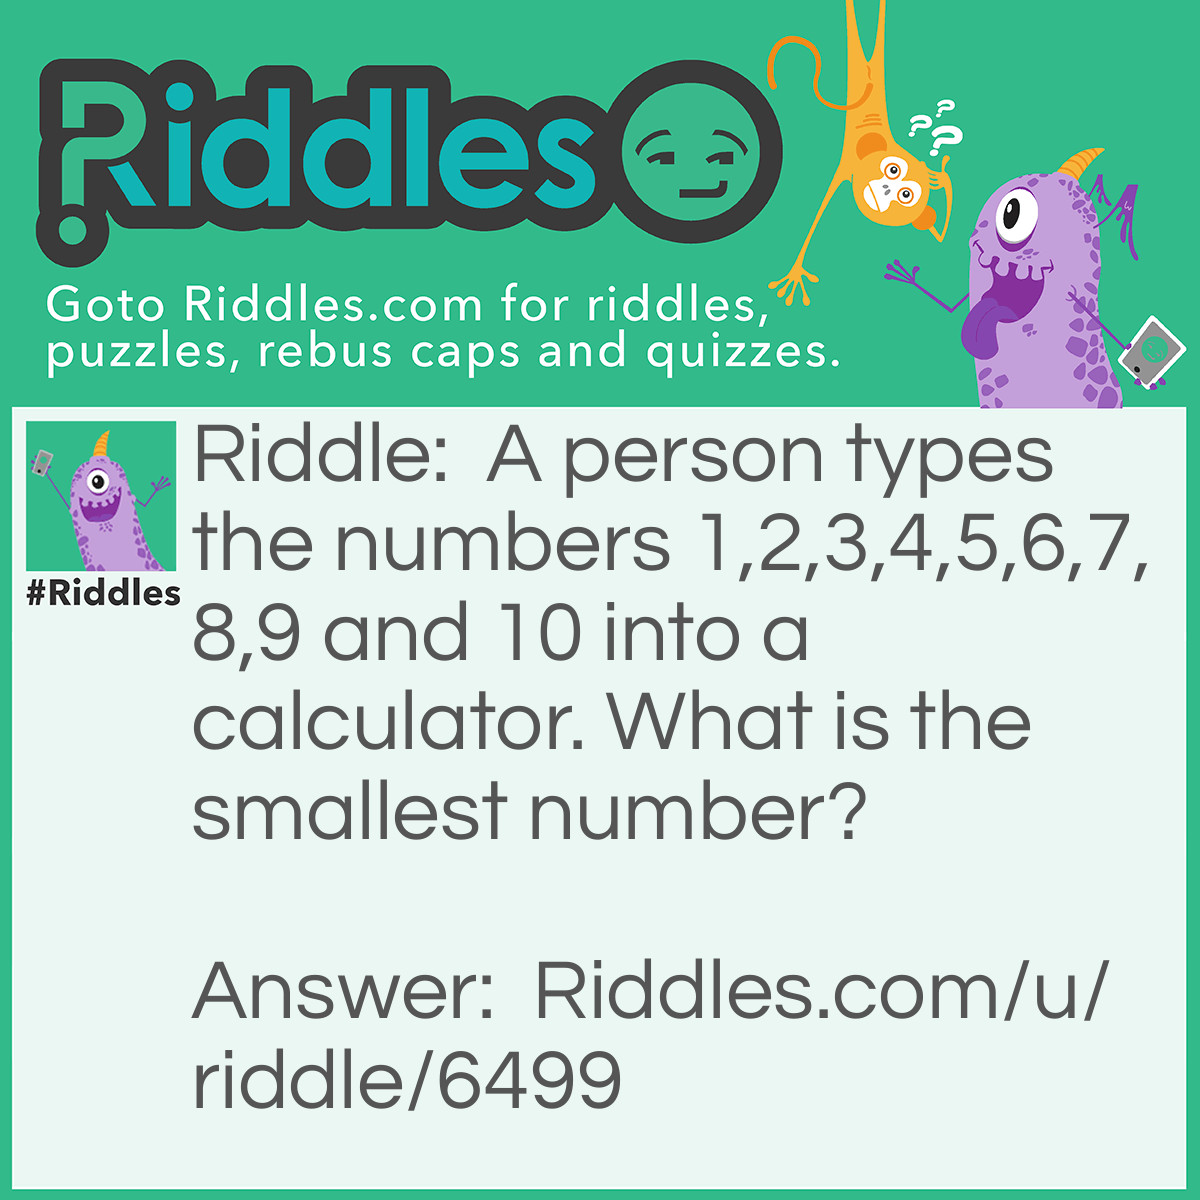 Riddle: A person types the numbers 1,2,3,4,5,6,7,8,9 and 10 into a calculator. What is the smallest number? Answer: 0.